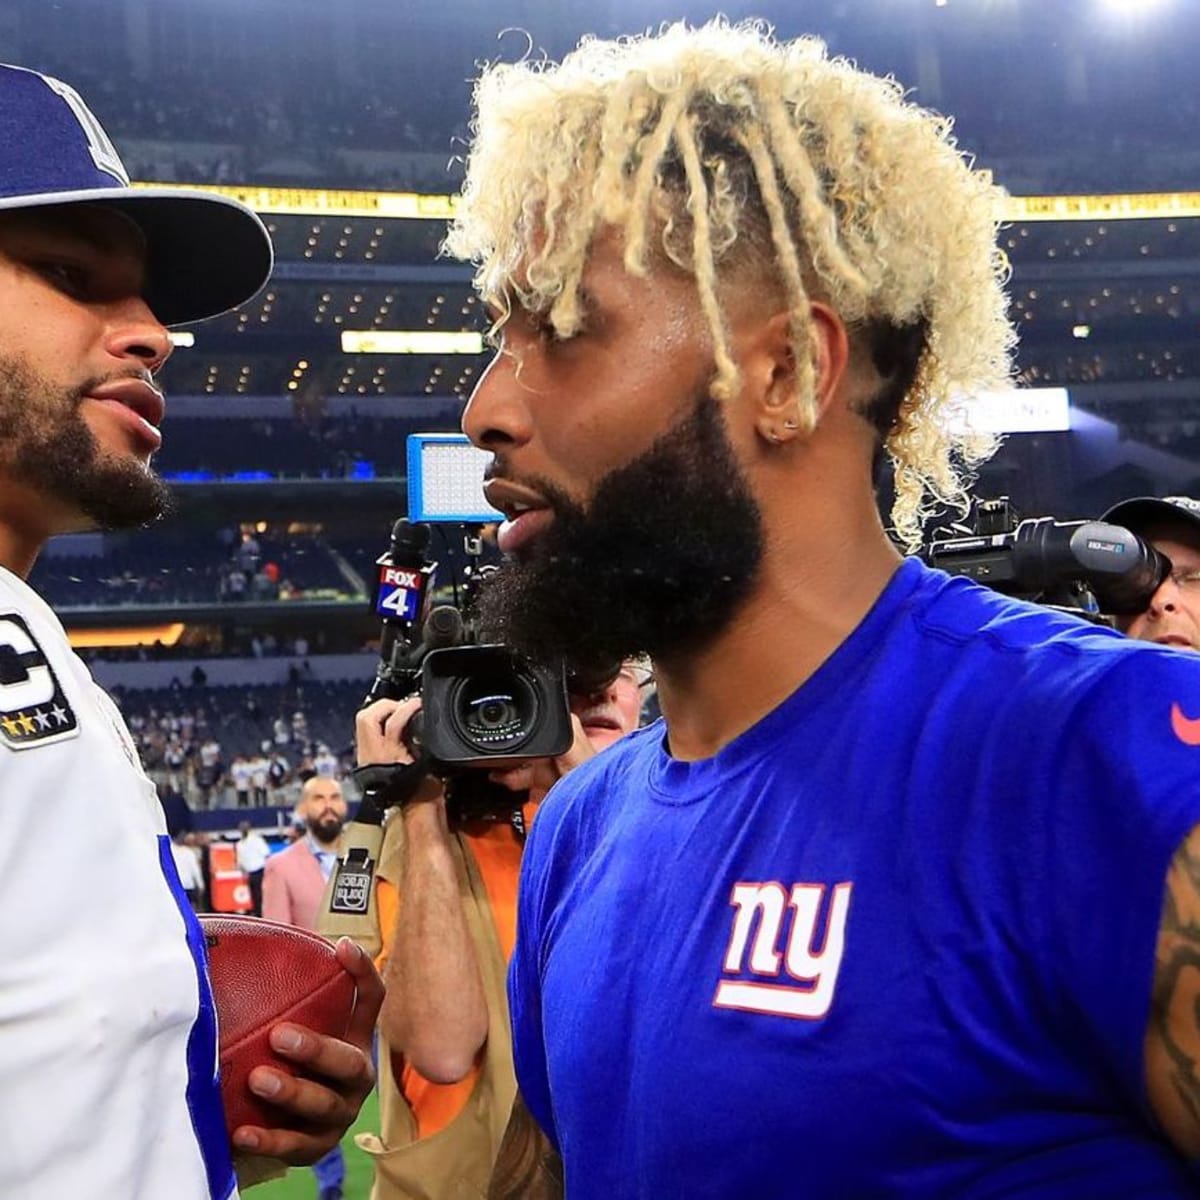 Odell Beckham Jr. recruited by Cowboys after comment on blowout